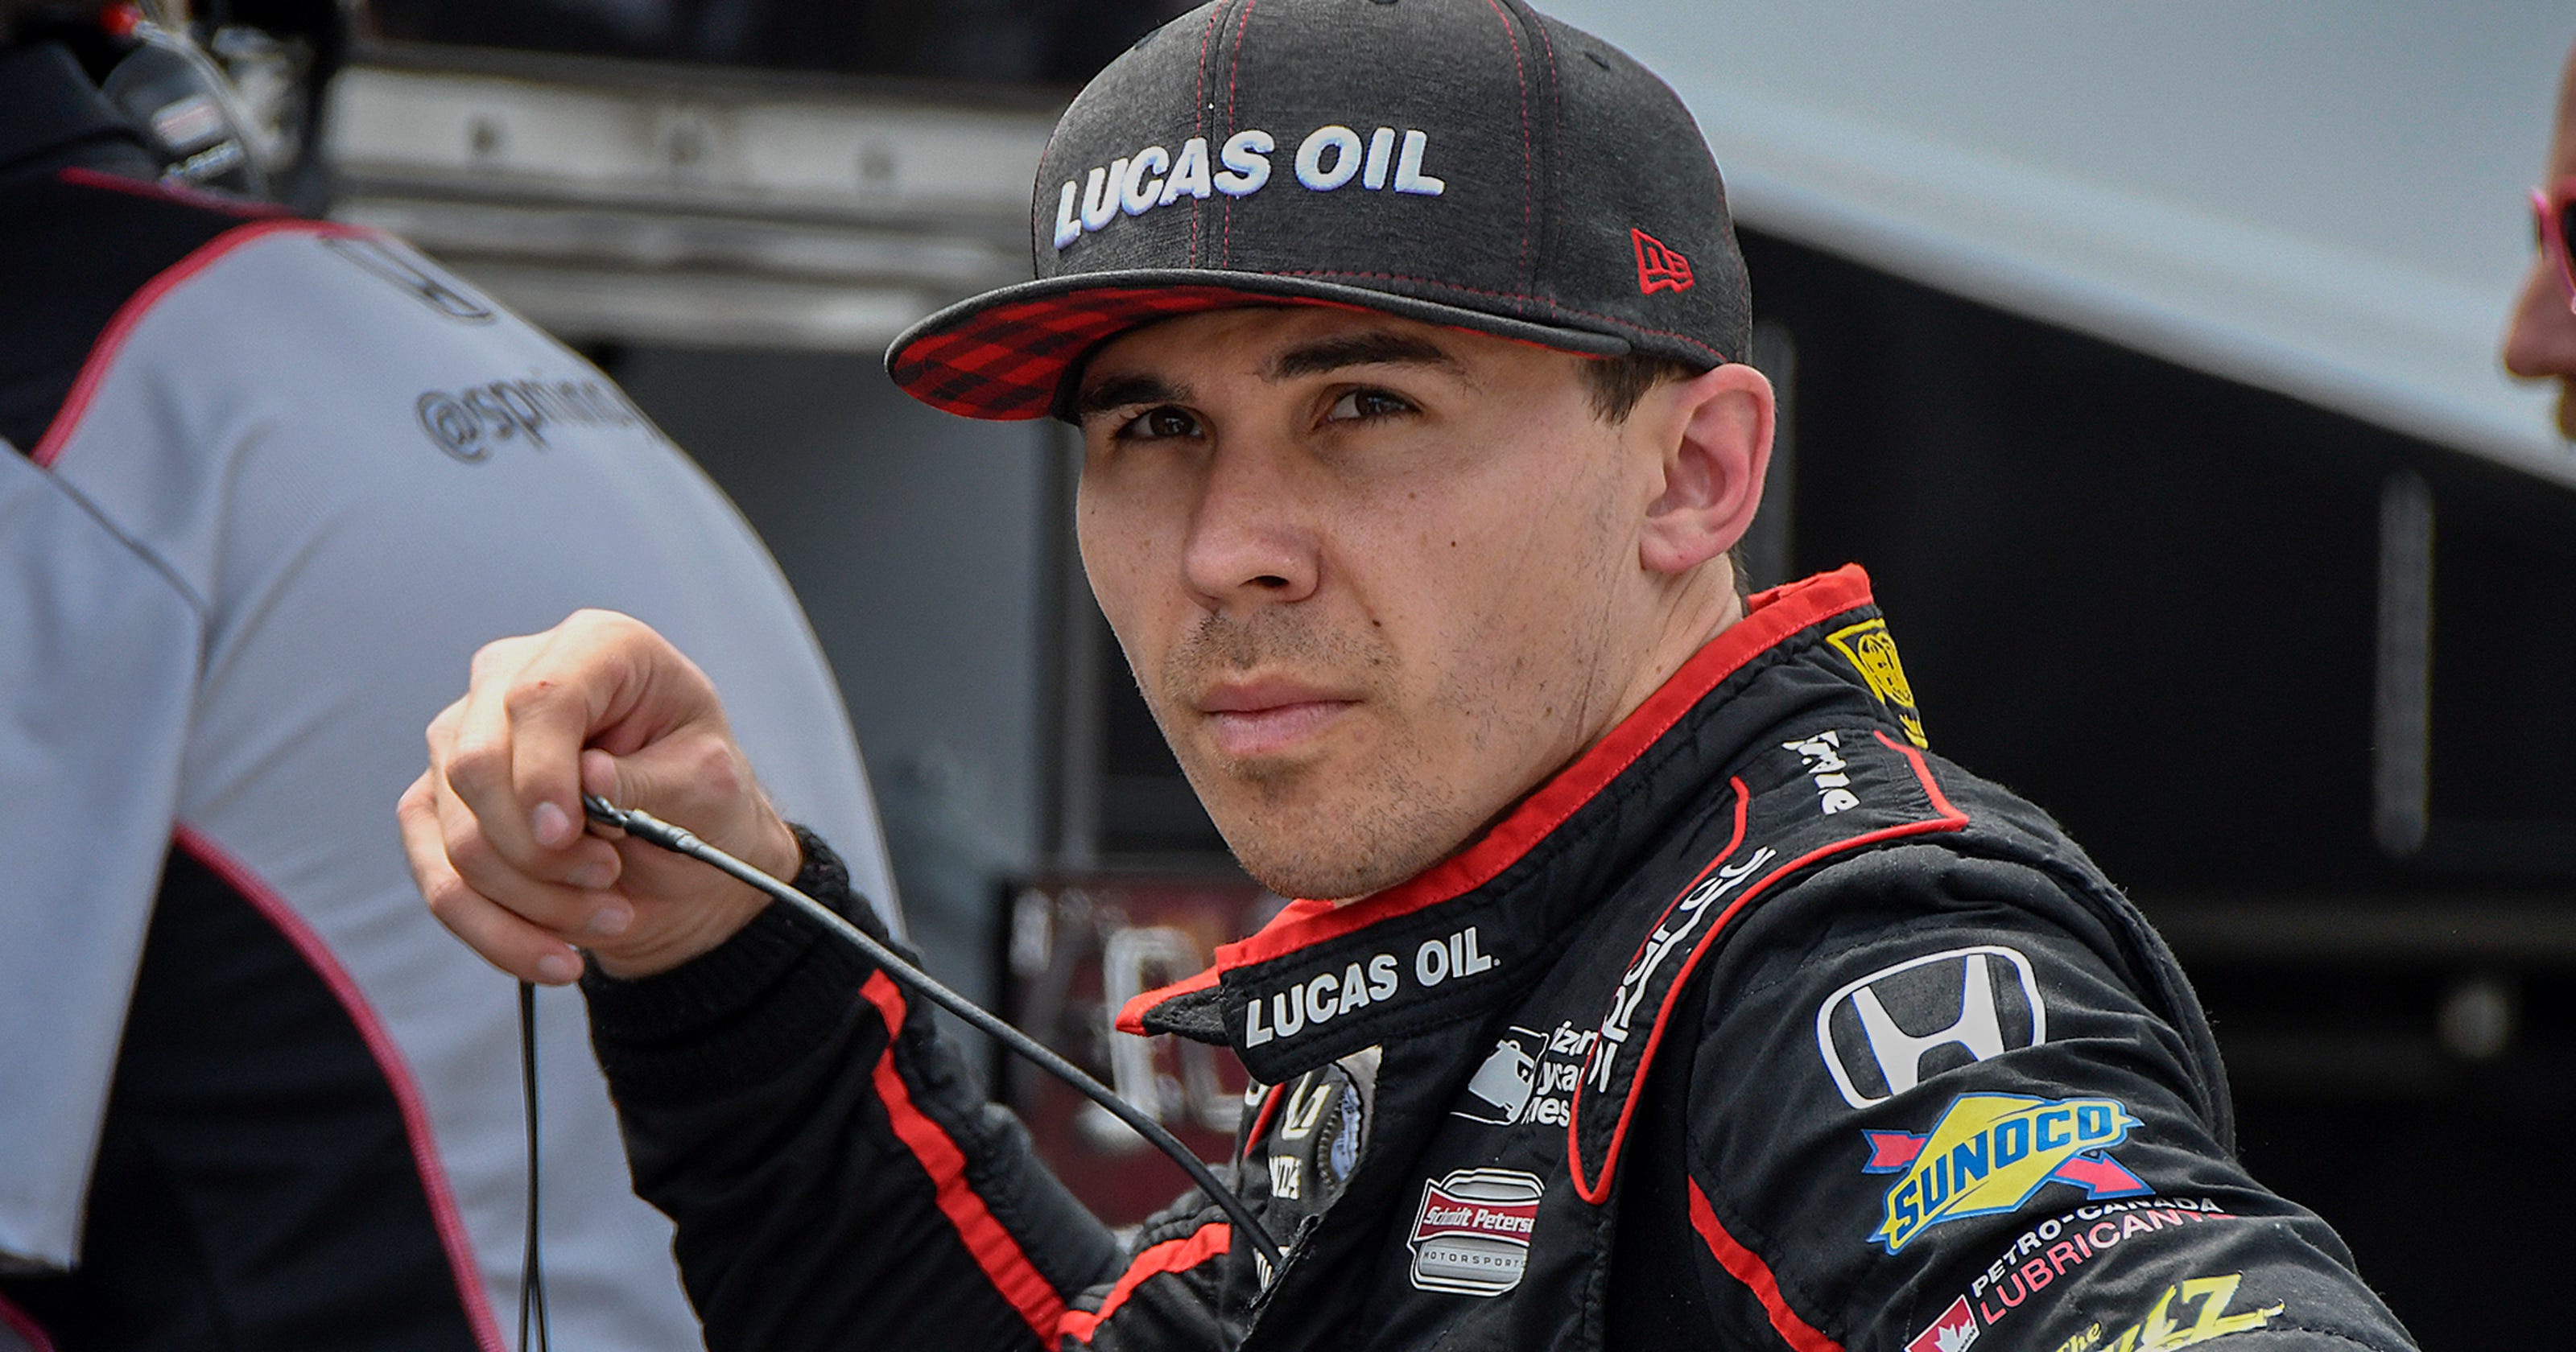 IndyCar's Robert Wickens 'I will be in a race car again'